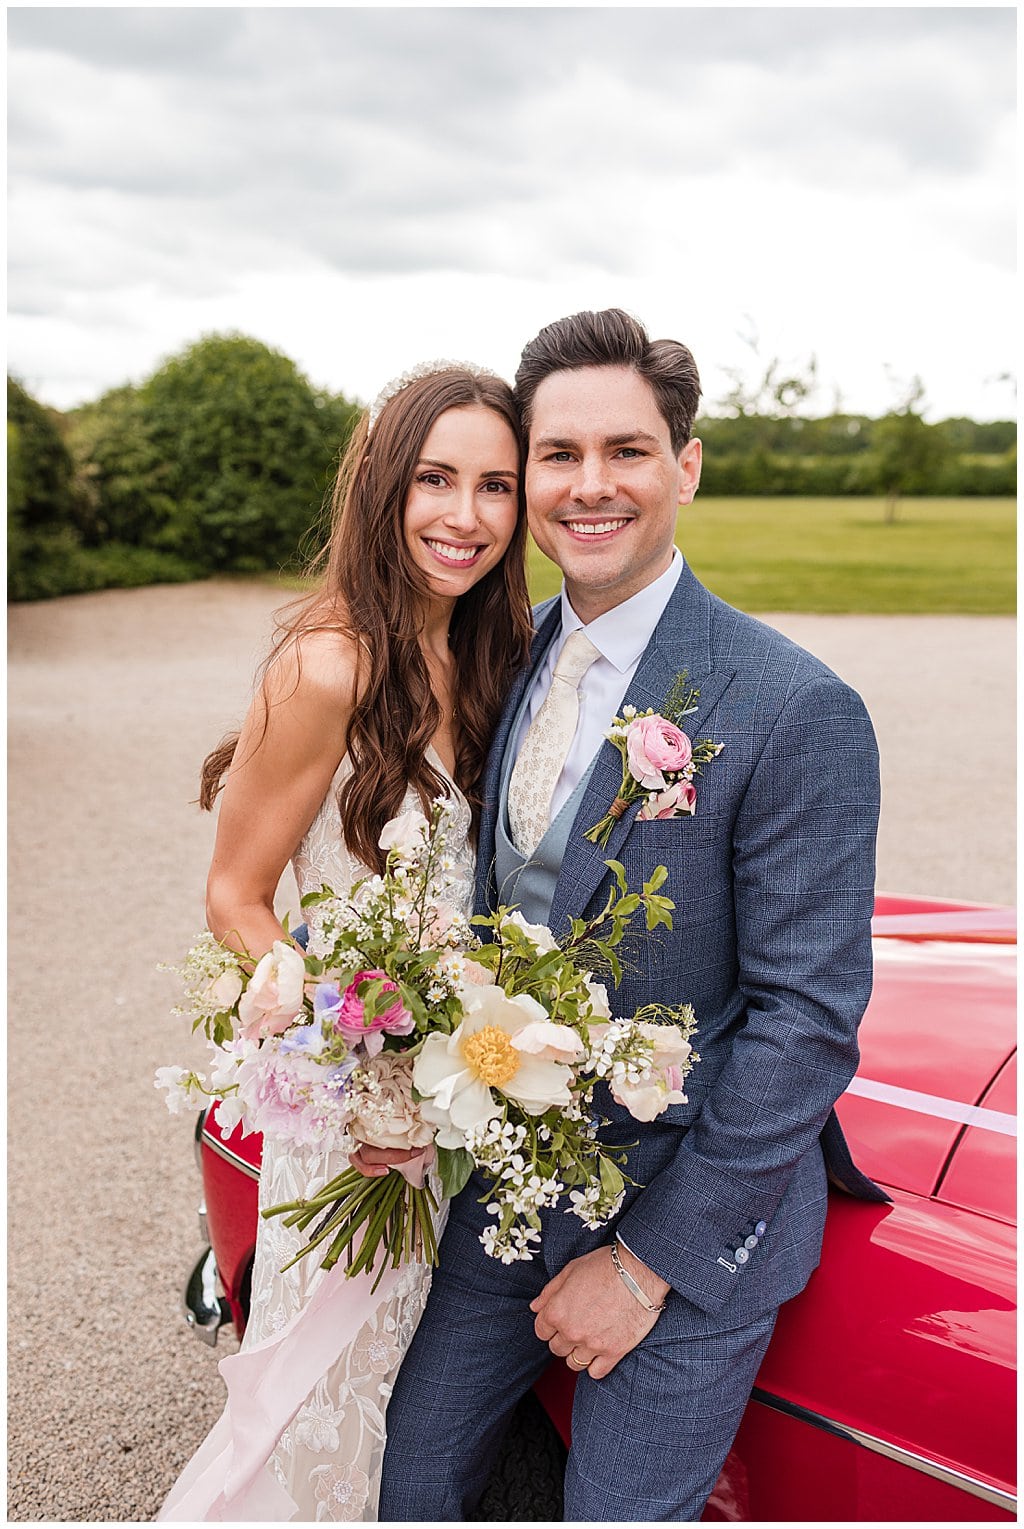 Happy portrait of a Bride and Groom sitting on a red sports car in the driveway of Alrewas Hayes. Bride wears hair loose and holds ribbon tied relaxed bouquet. Groom wears blue check three piece suit